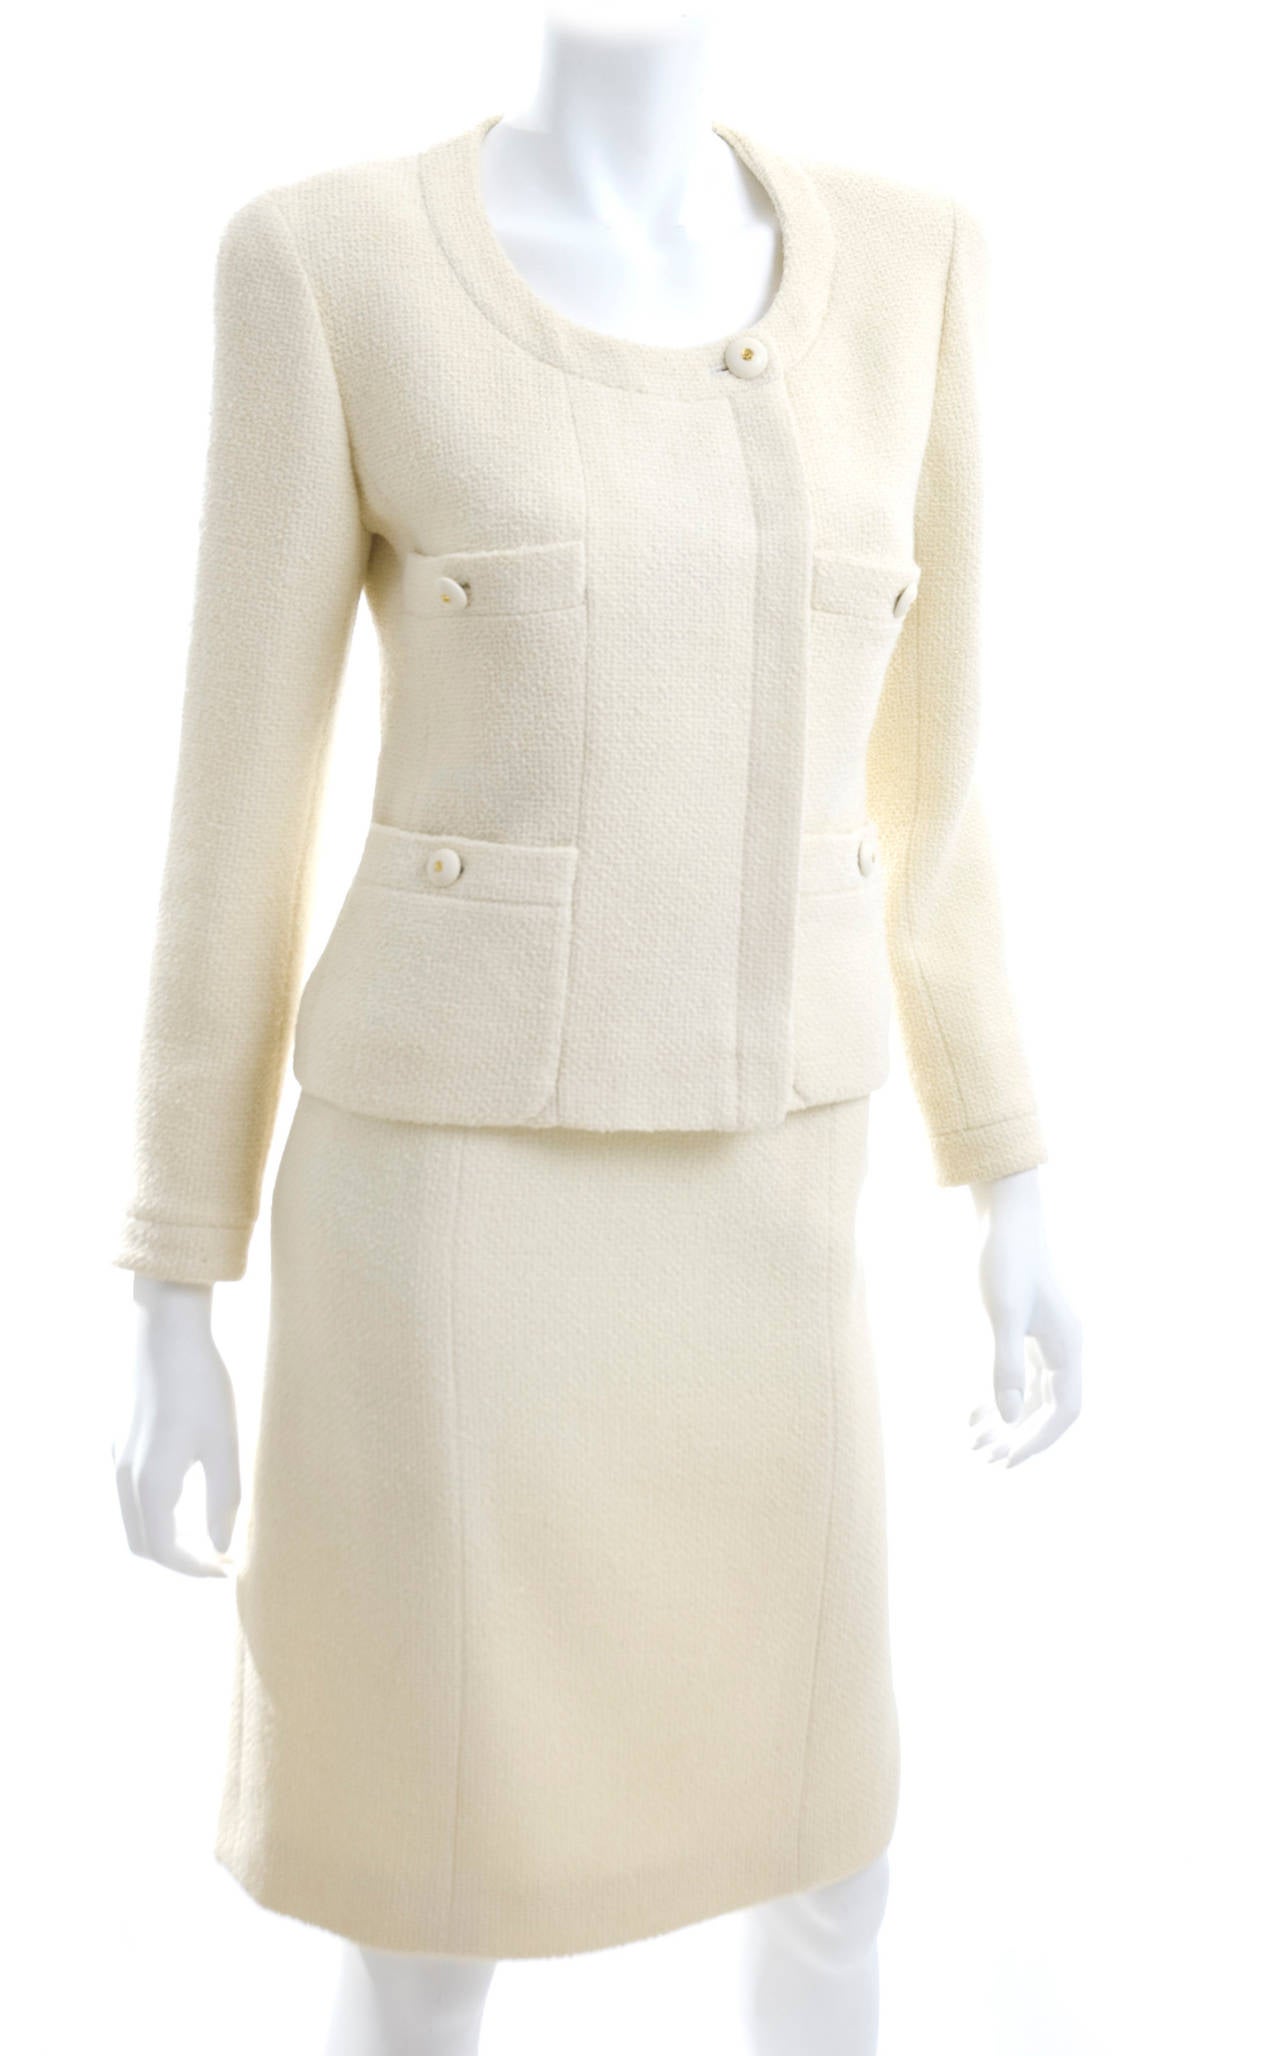 Chanel Suit in creme wool.
Size 40 FR 
Excellent condition - the only issue the lining at armpits are a bid stained.
Please see pictures.
Dry cleaned and ready to wear.

Measurements:
Jacket length 22